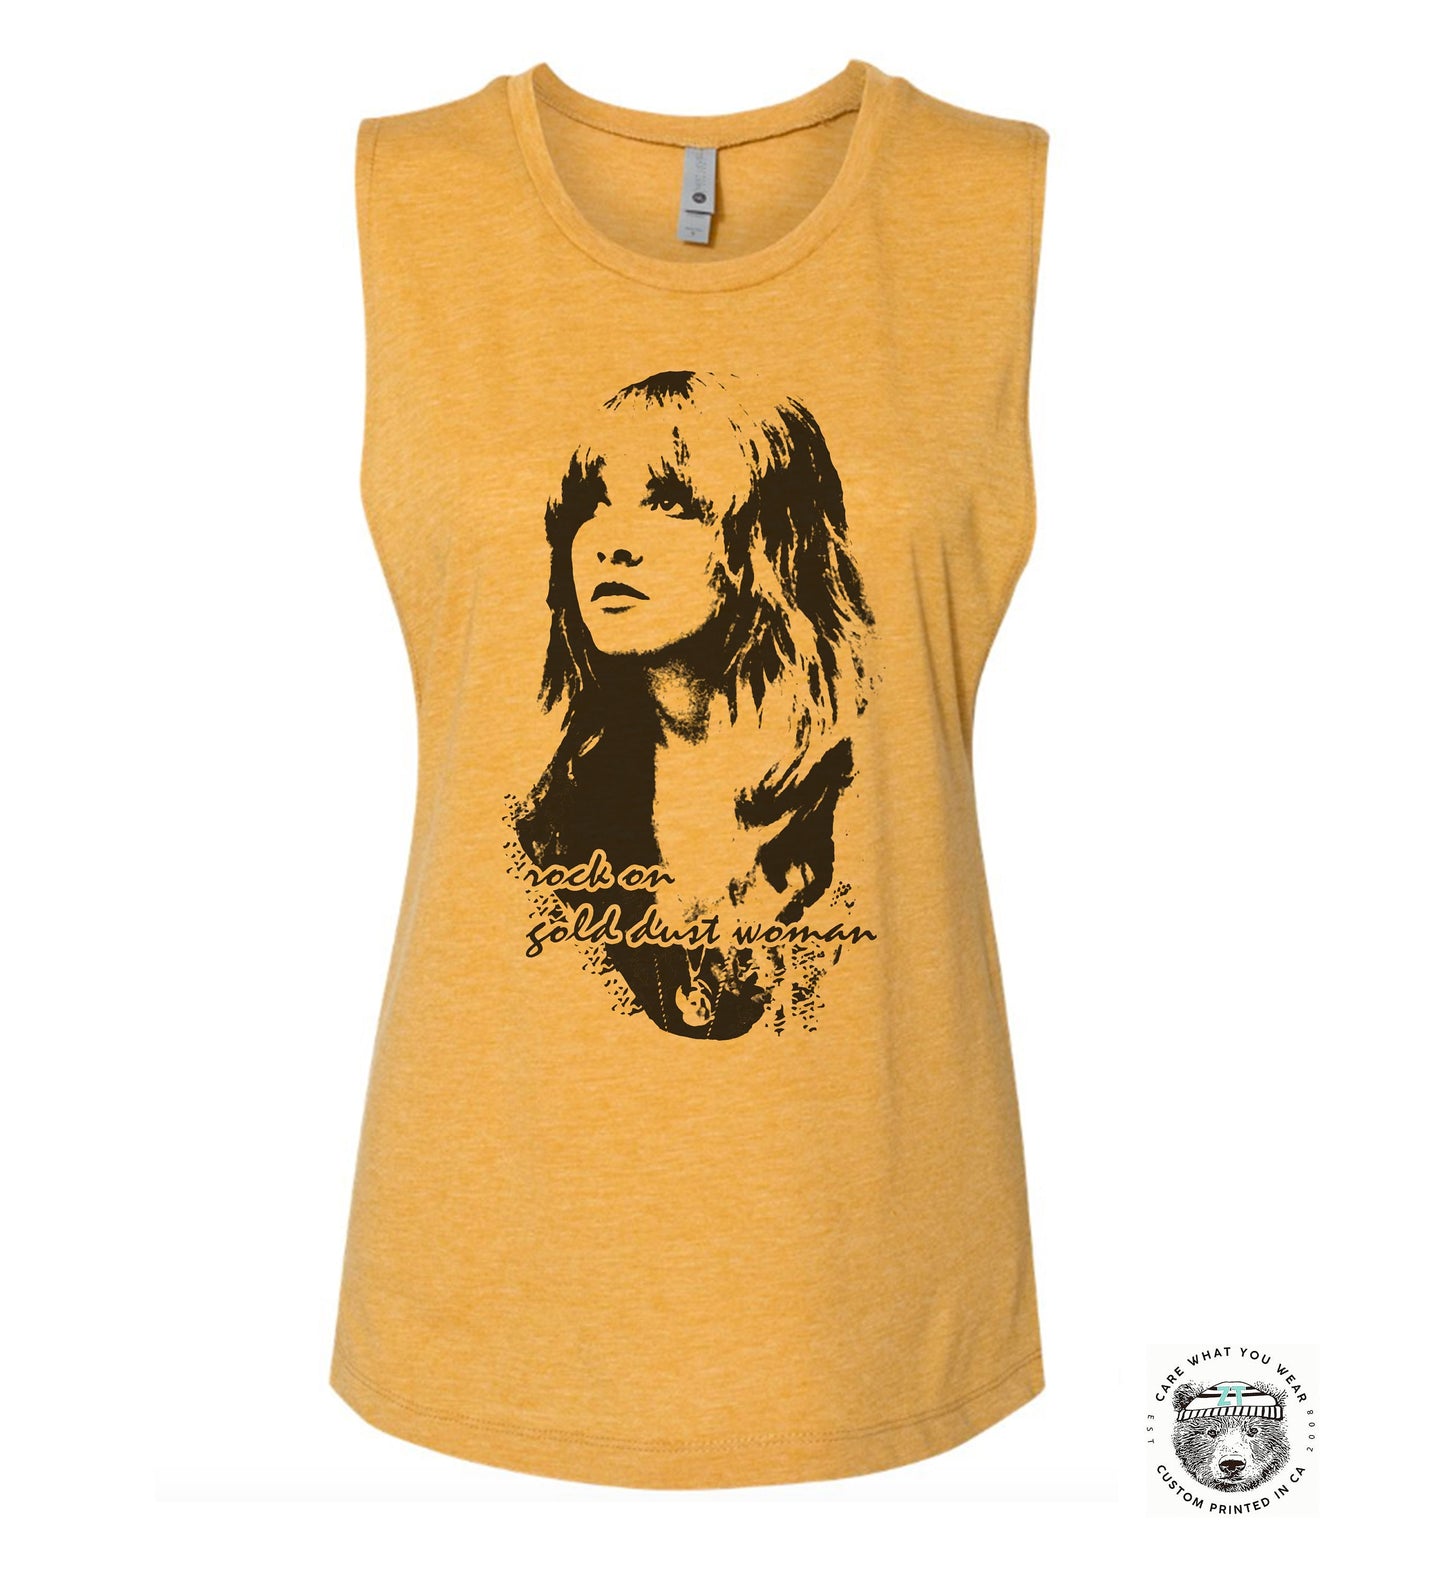 Gold Dust Woman Festival Muscle Tank workout fitness tee Bella Canvas Next Level tshirt stevie nicks fleetwood mac music gypsy music concert